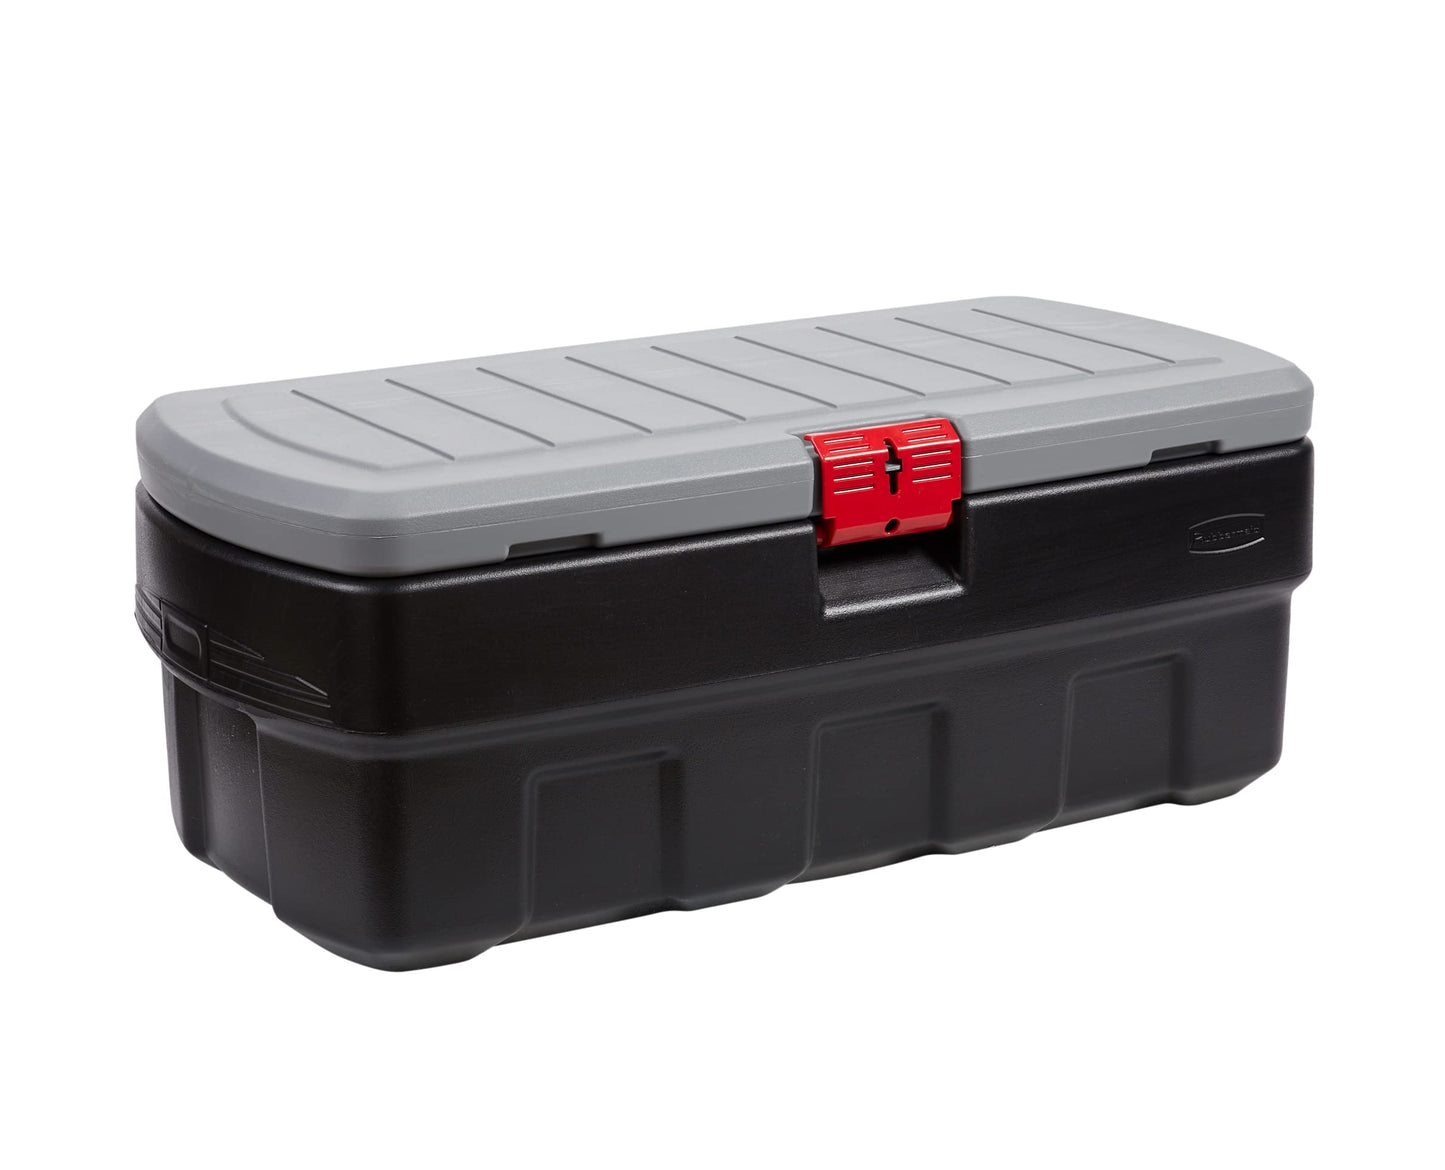 Rubbermaid ActionPacker️ 48 Gal Lockable Plastic Storage Bin, Industrial, Rugged Large Container with Lid (Black,gray)